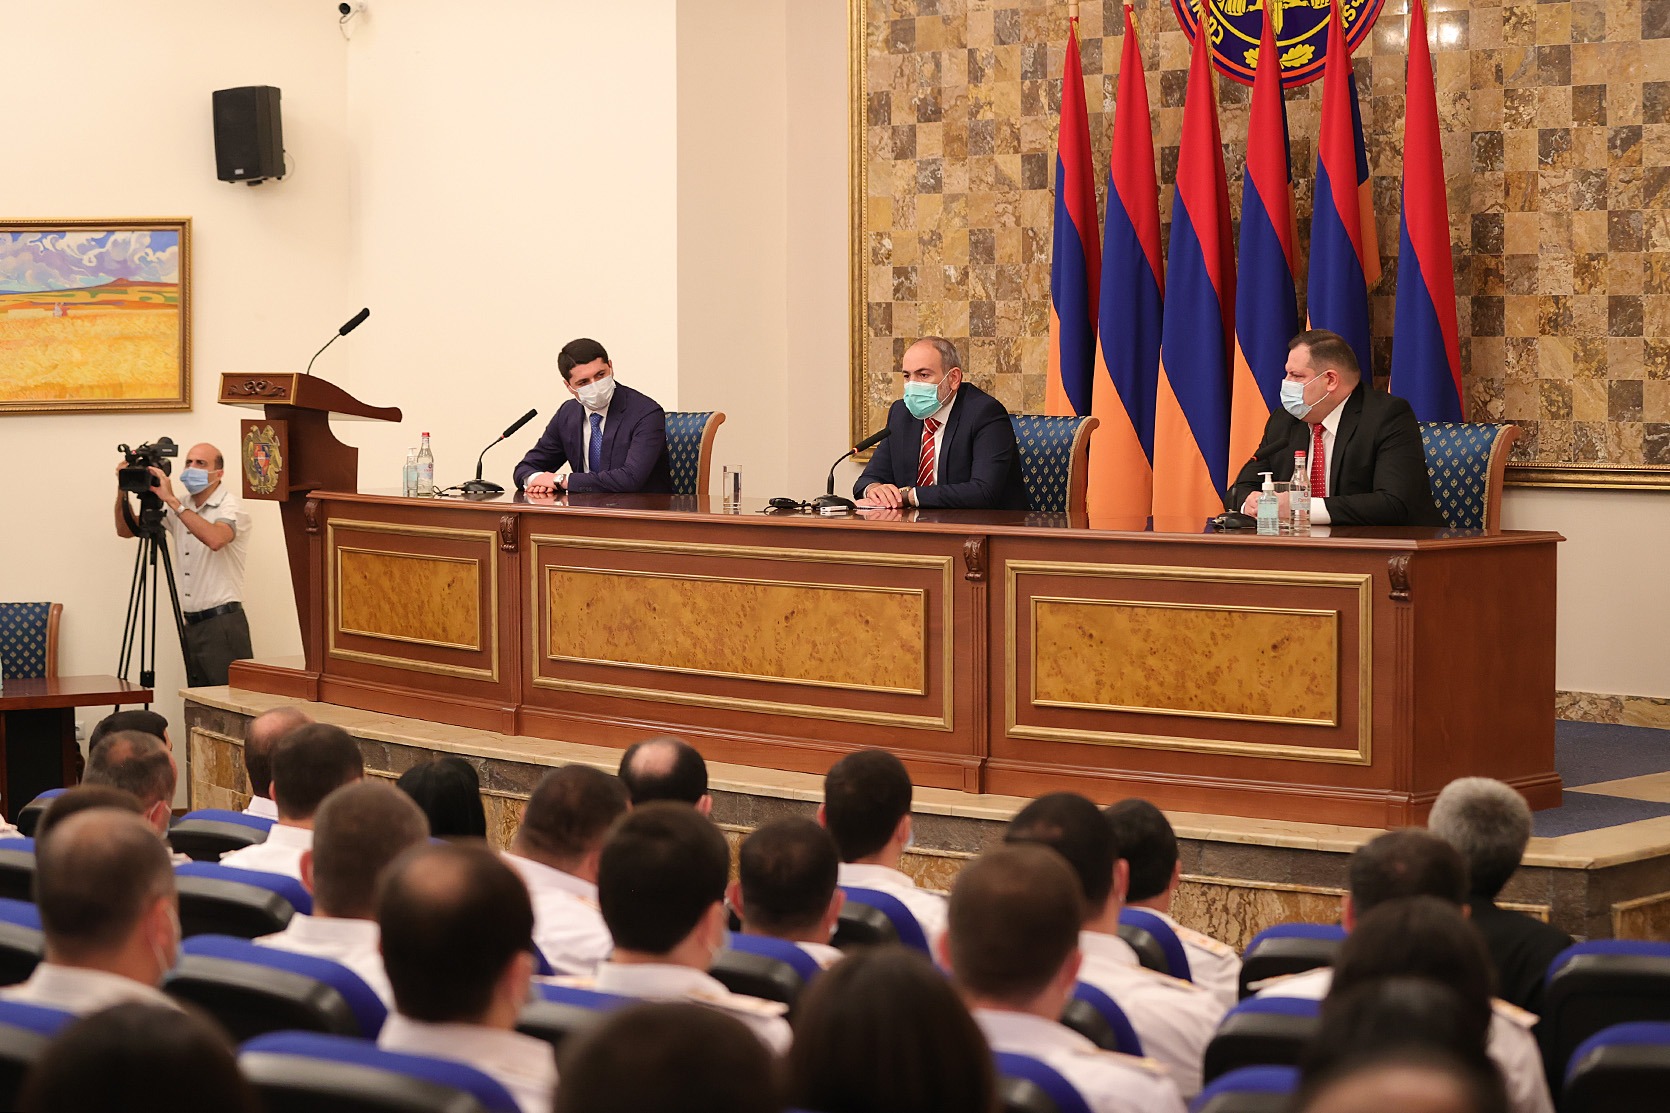 ‘I look forward to more effective and decisive actions on the part of the Investigative Committee’ – Nikol Pashinyan introduces Argishti Kyaramyan to IC Board members